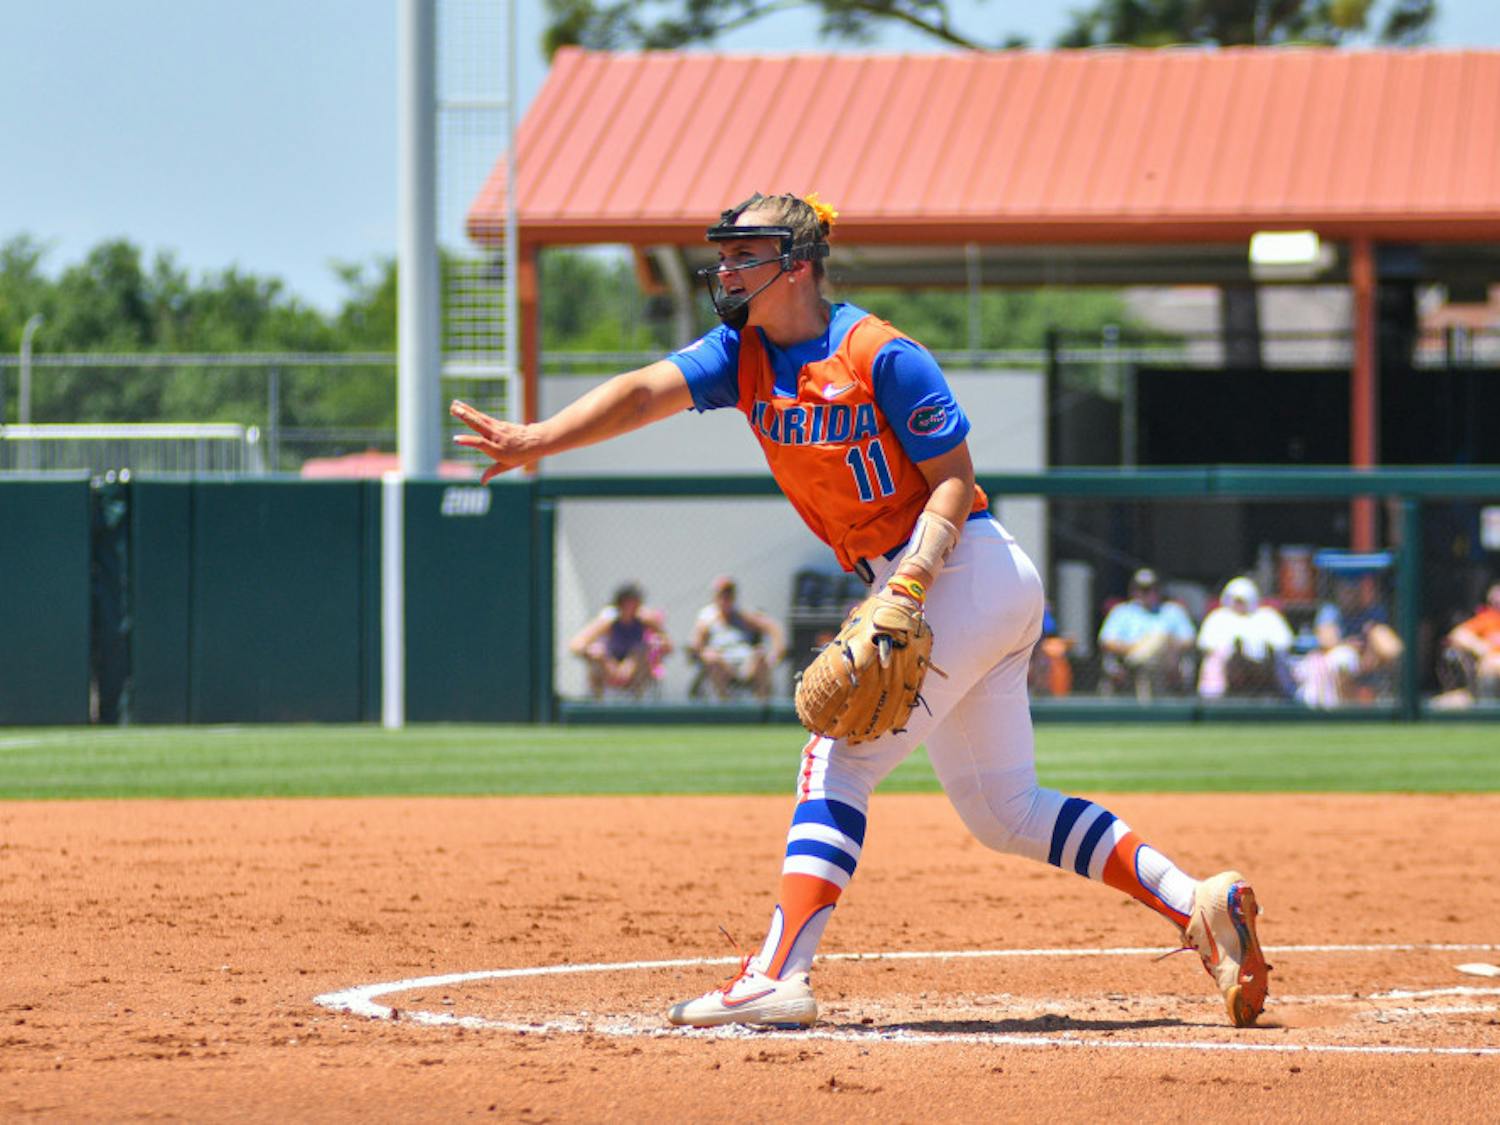 Kelly Barnhill struggled on Saturday as UF's season came to an end.